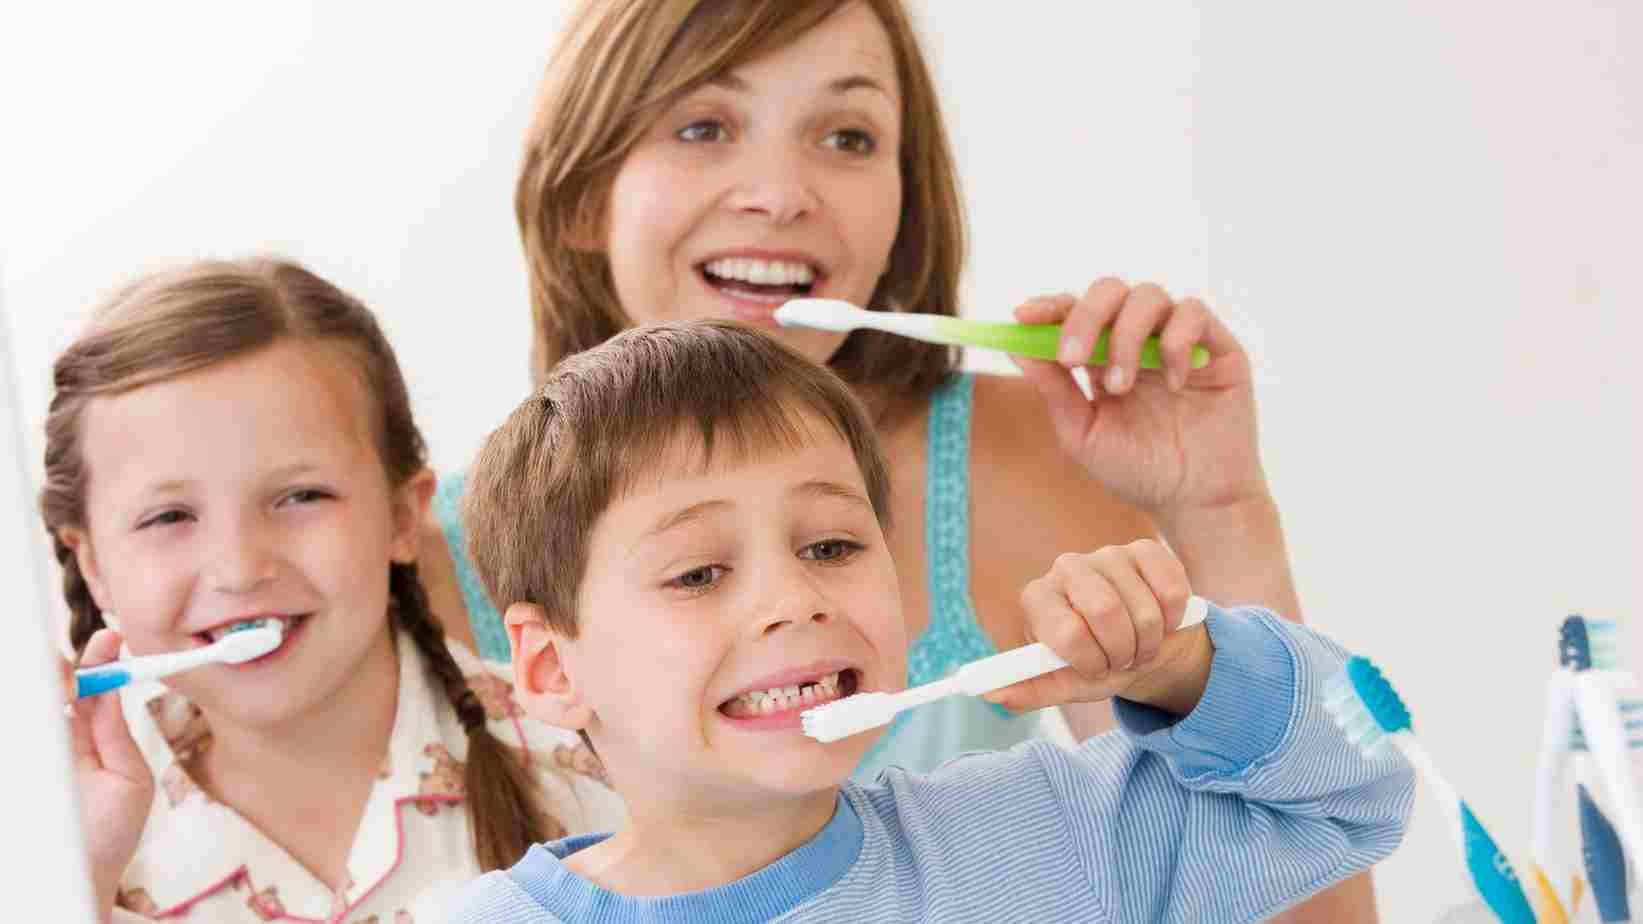 A family brushing her teeth